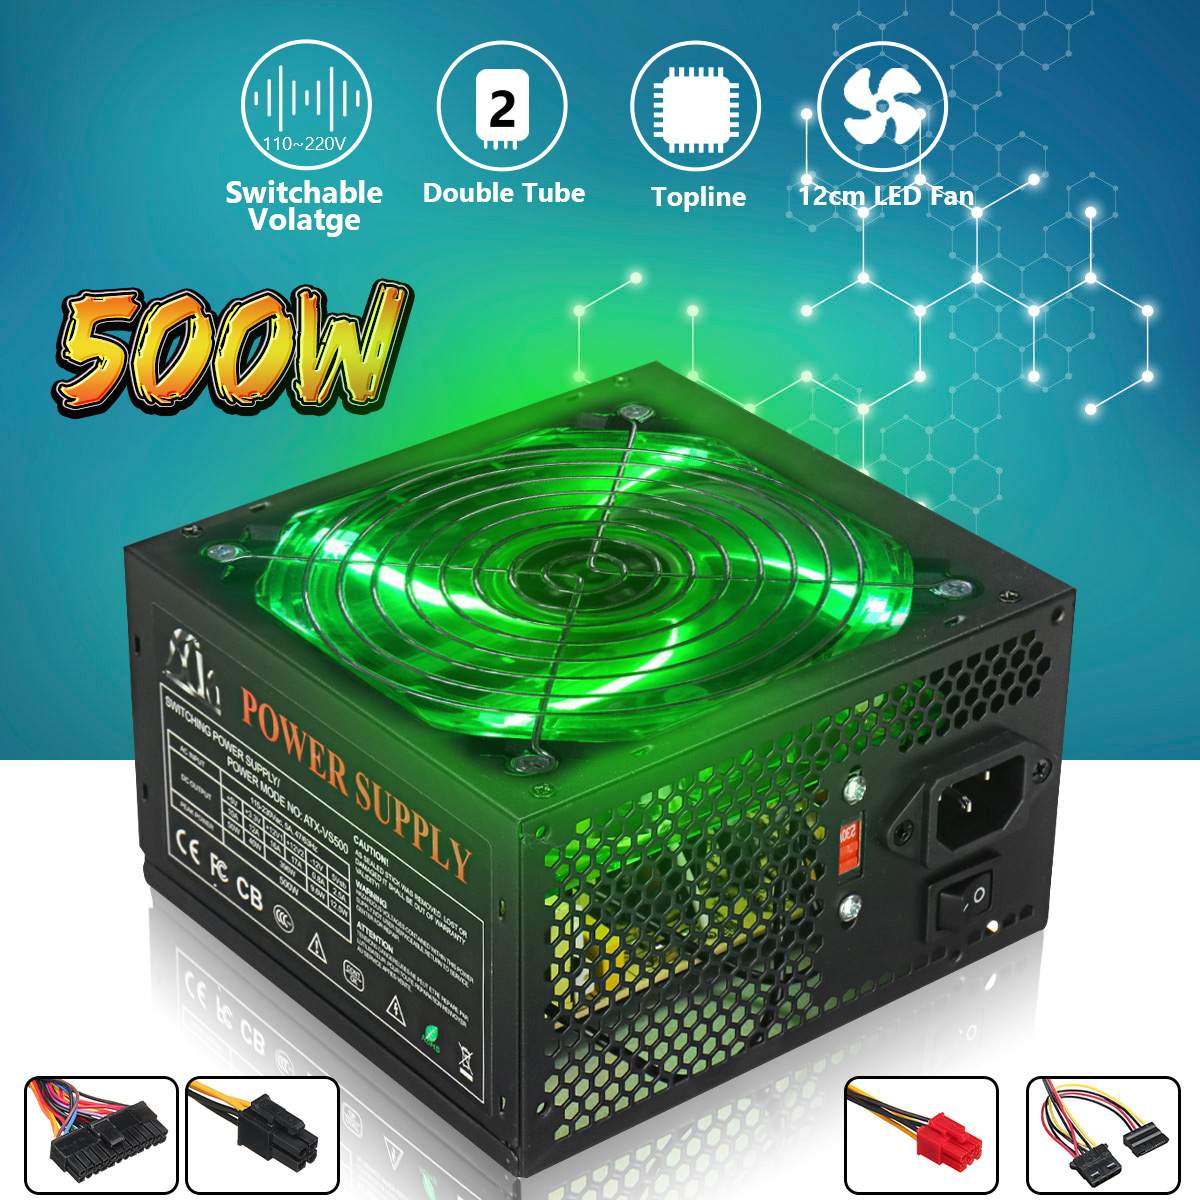 500W Voeding 120 Mm Led Fan 24 Pin Pci Sata Atx 12V Pc Computer Voeding Voor desktop Gaming